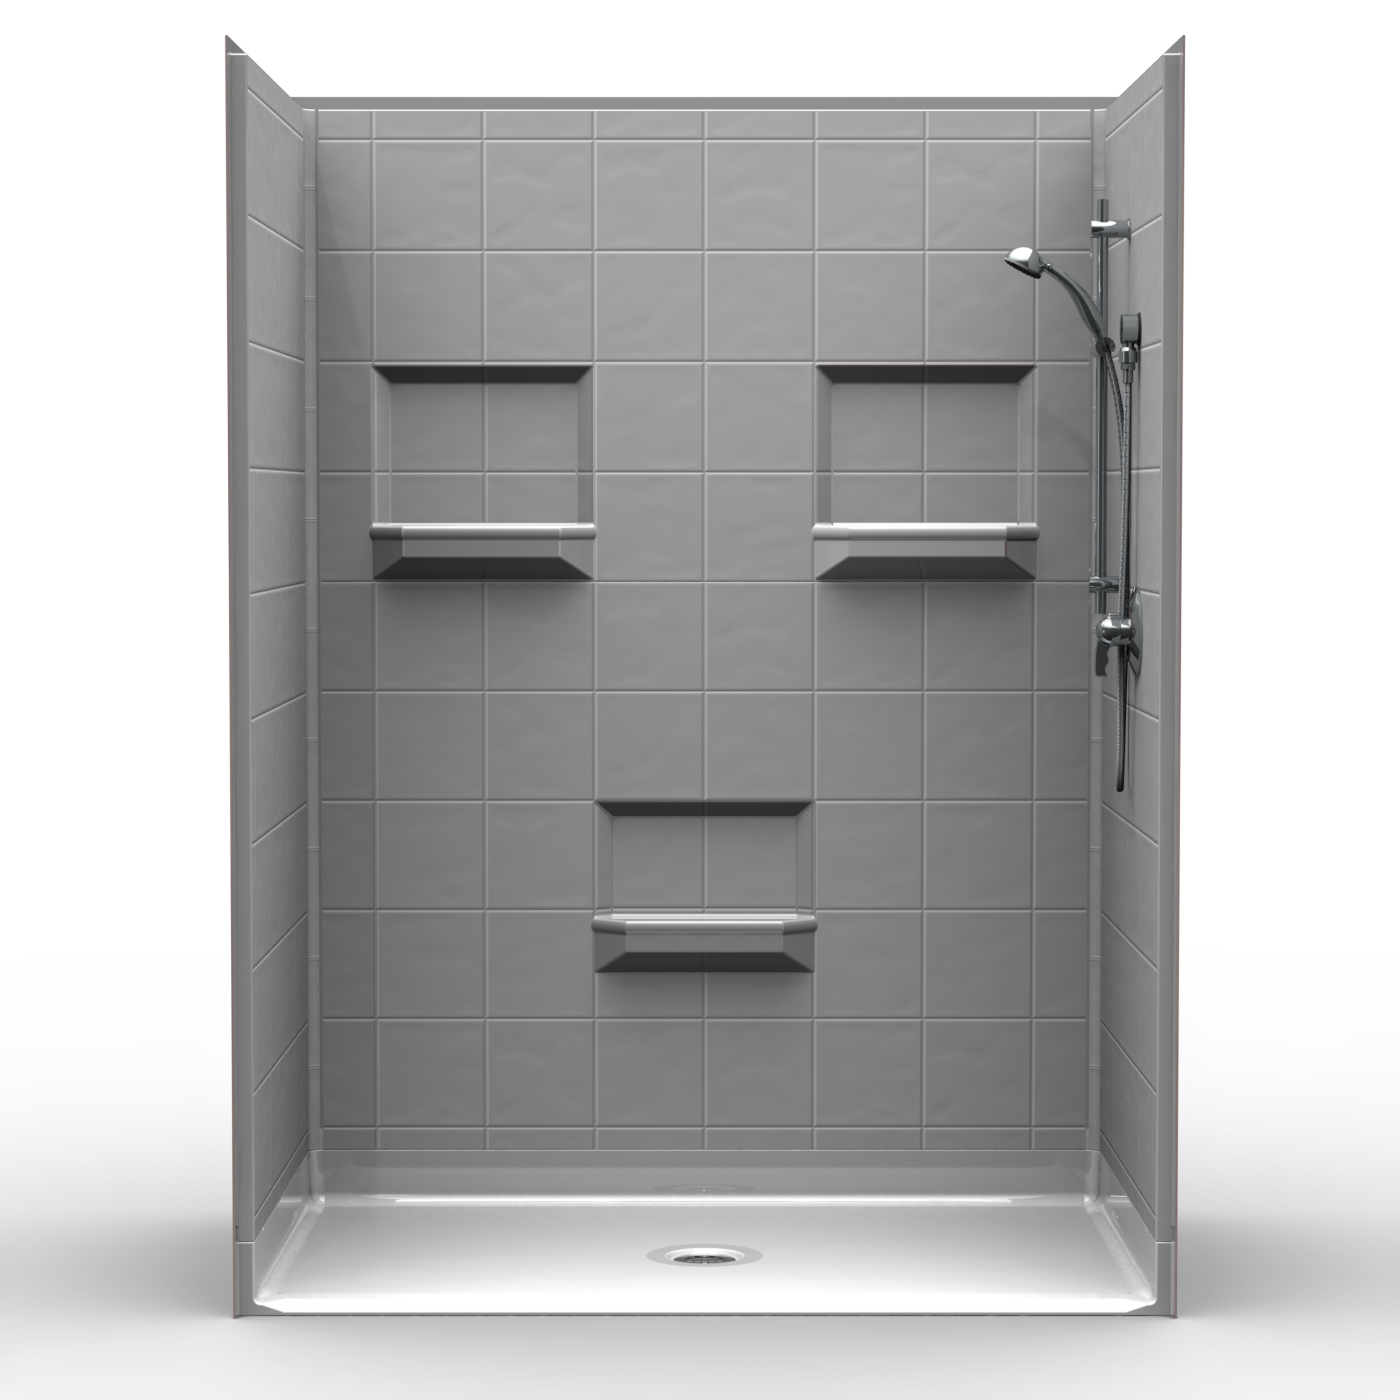 60" x 36" Roll In Shower | Barrier Free Showers | Wheelchair Accessible Shower